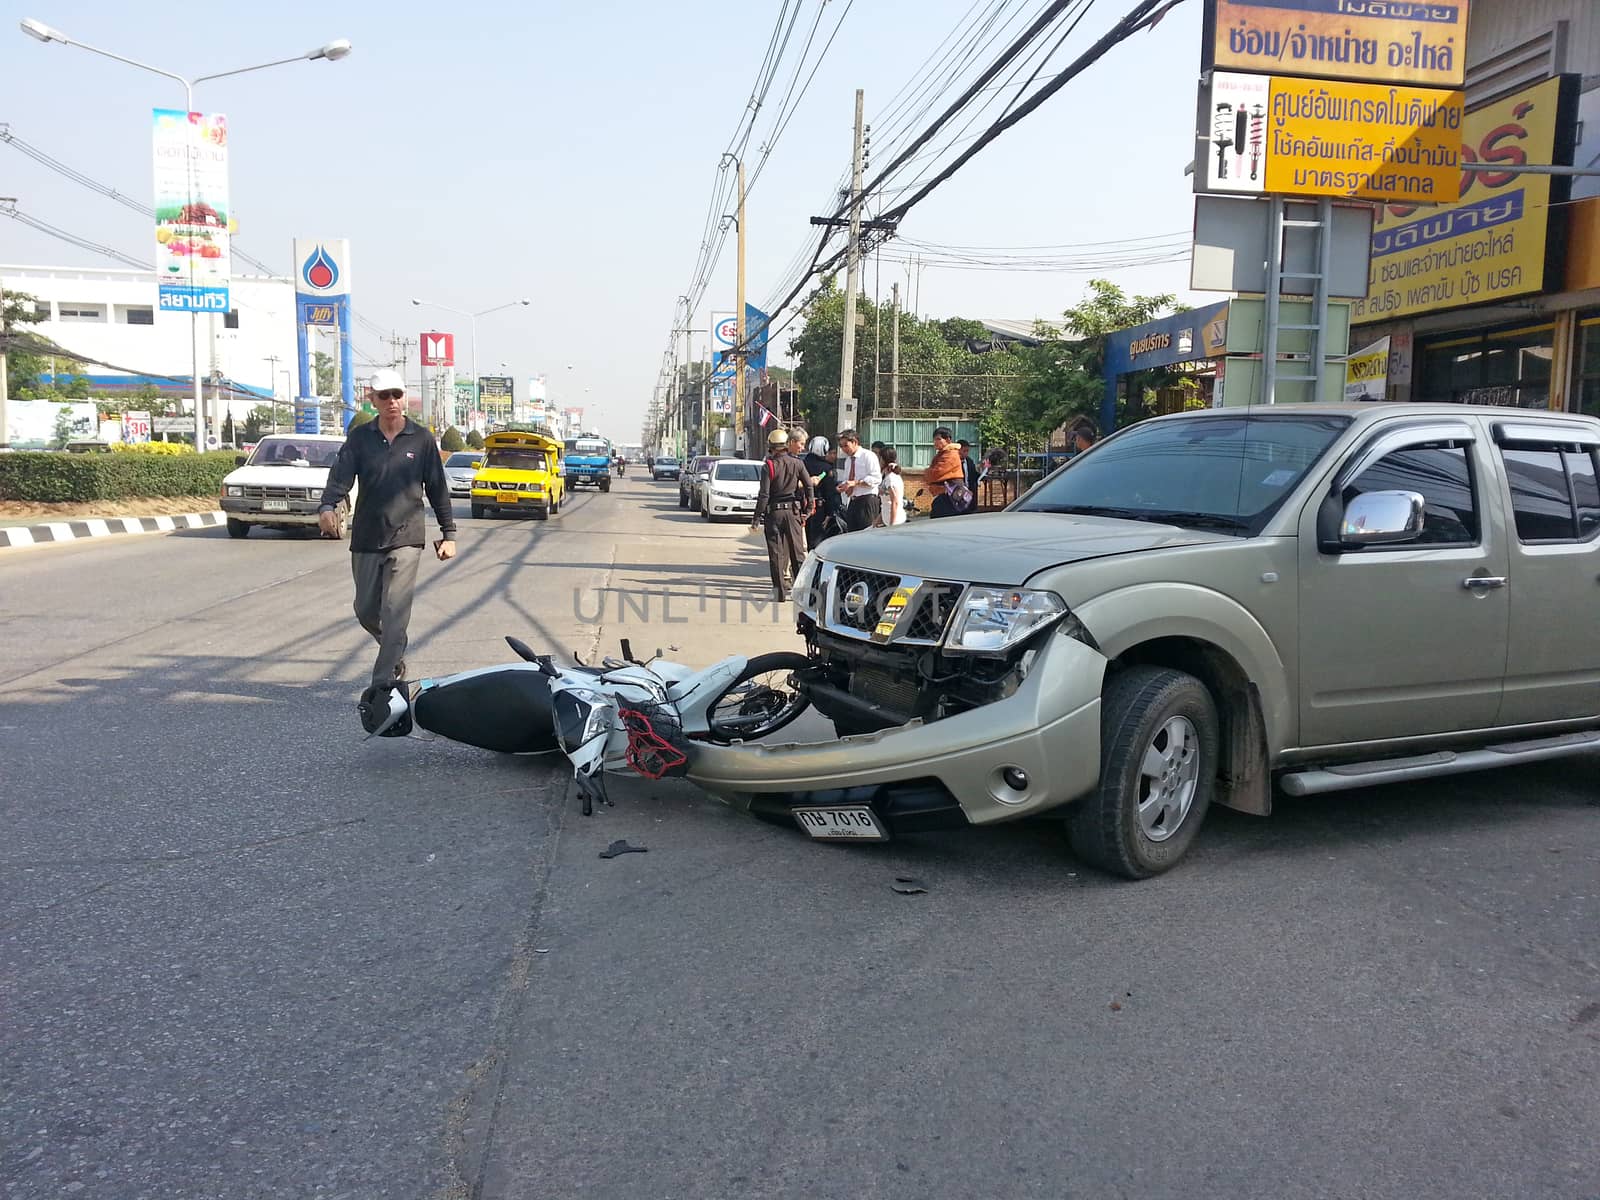 Crash Accident Pickup Truck And Motorcycle by mranucha